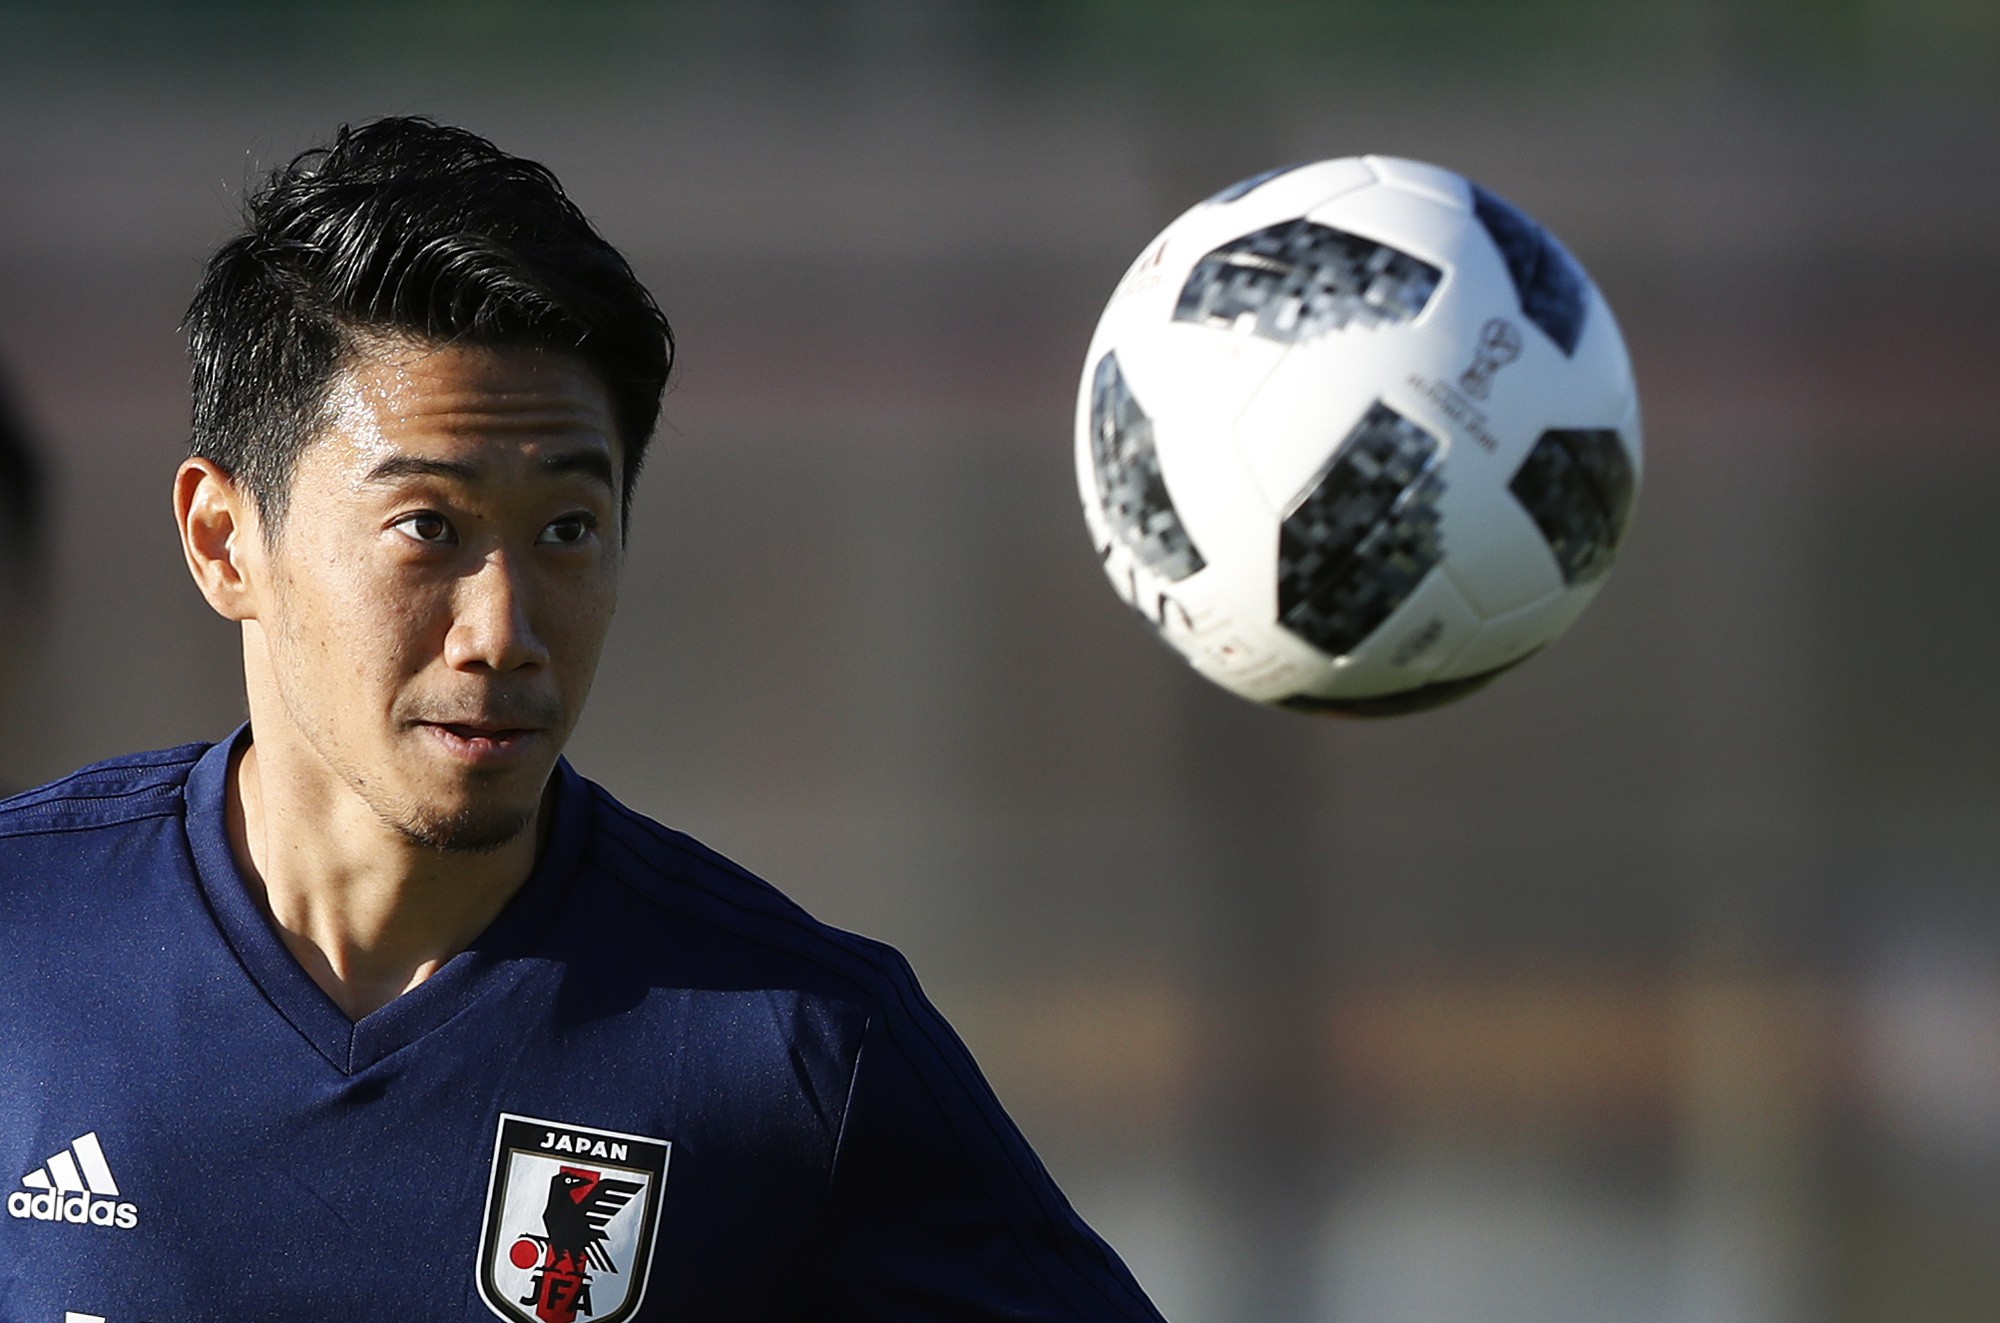 Japan’s Shinji Kagawa is perhaps one of the most famous – and most highly paid – of all the Asian footballers players playing in Europe. Photo: AP